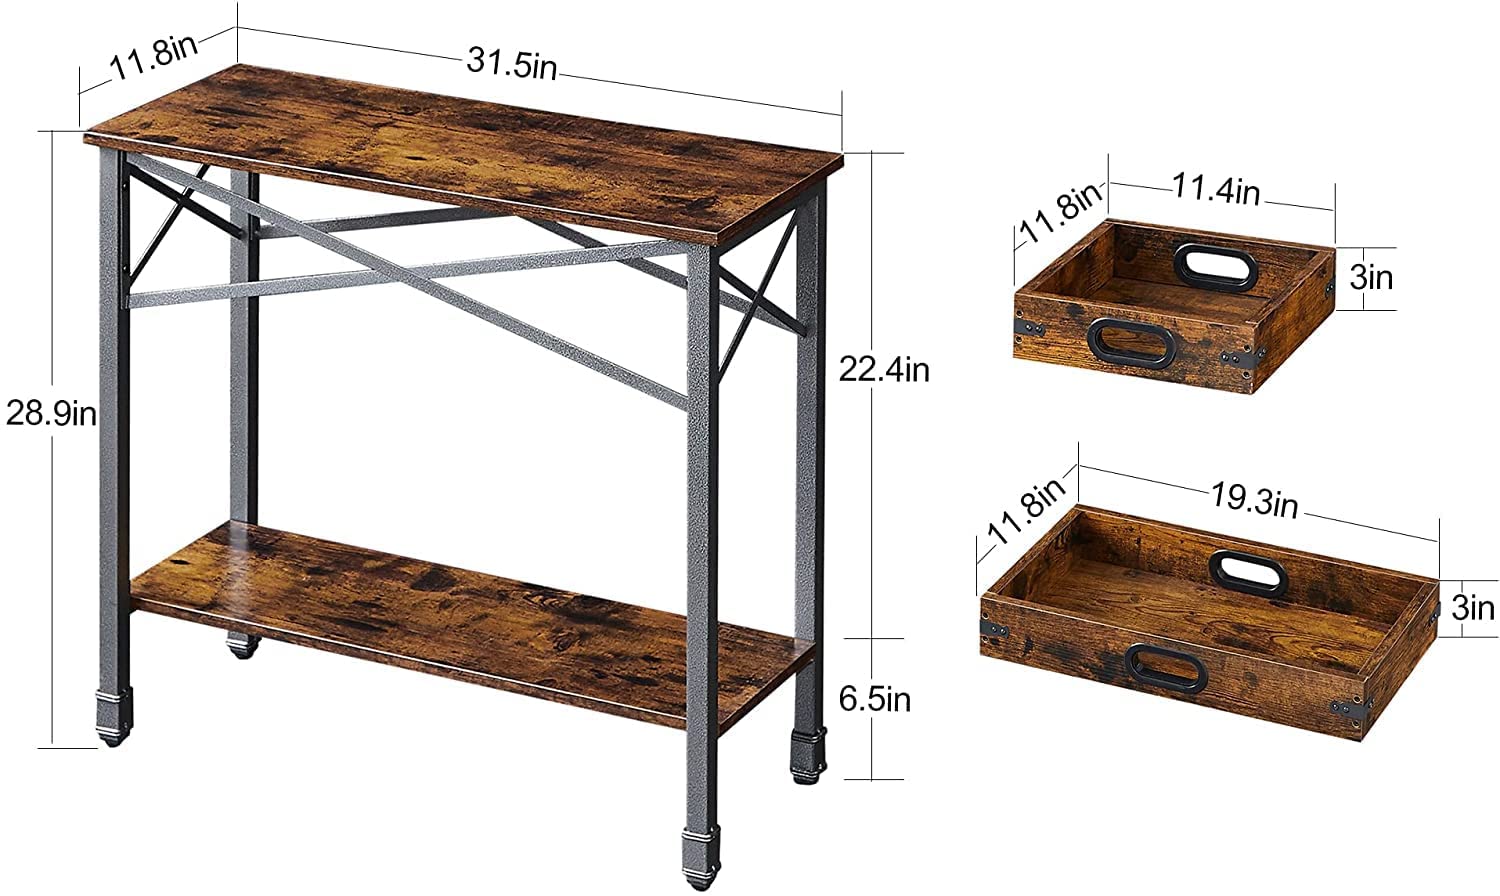 Narrow Serving Table